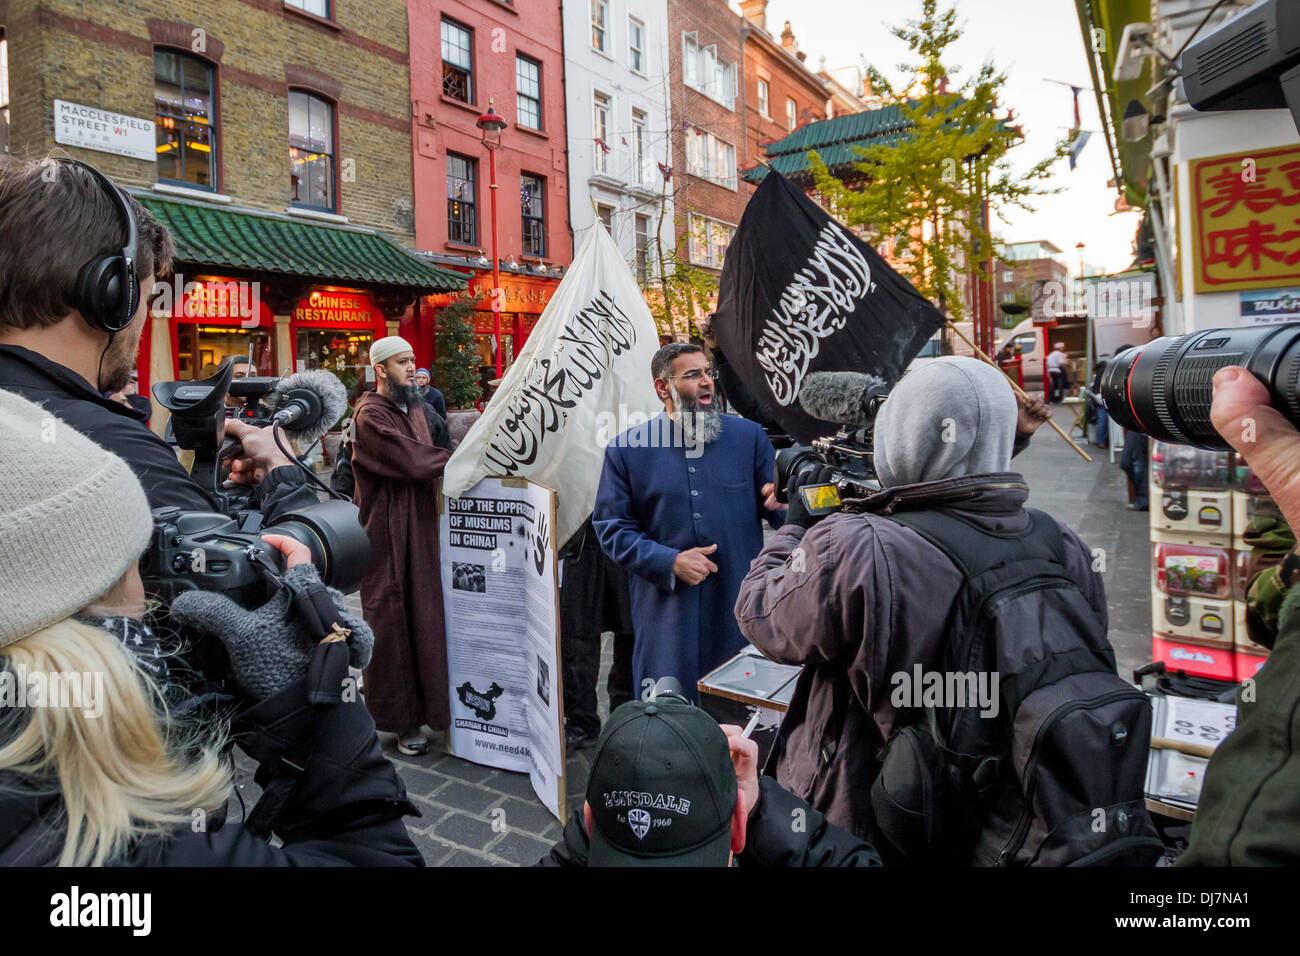 Radical Islamist Anjem Choudary protests in London’s Chinatown Stock Photo